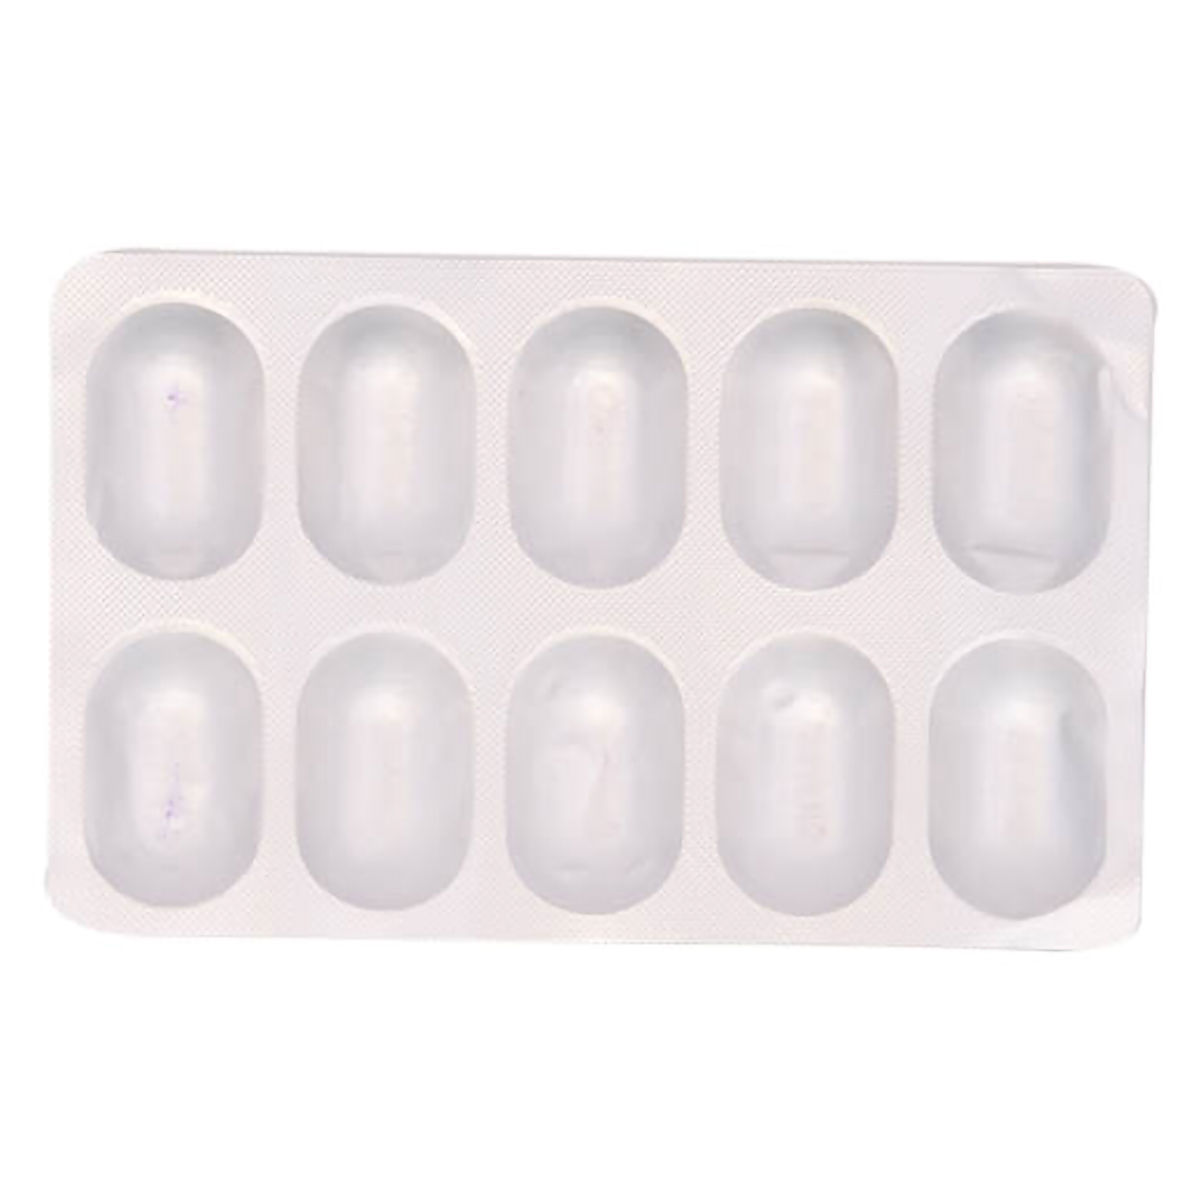 Boomcal Plus Tablet 10'S, Pack of 10 TabletS